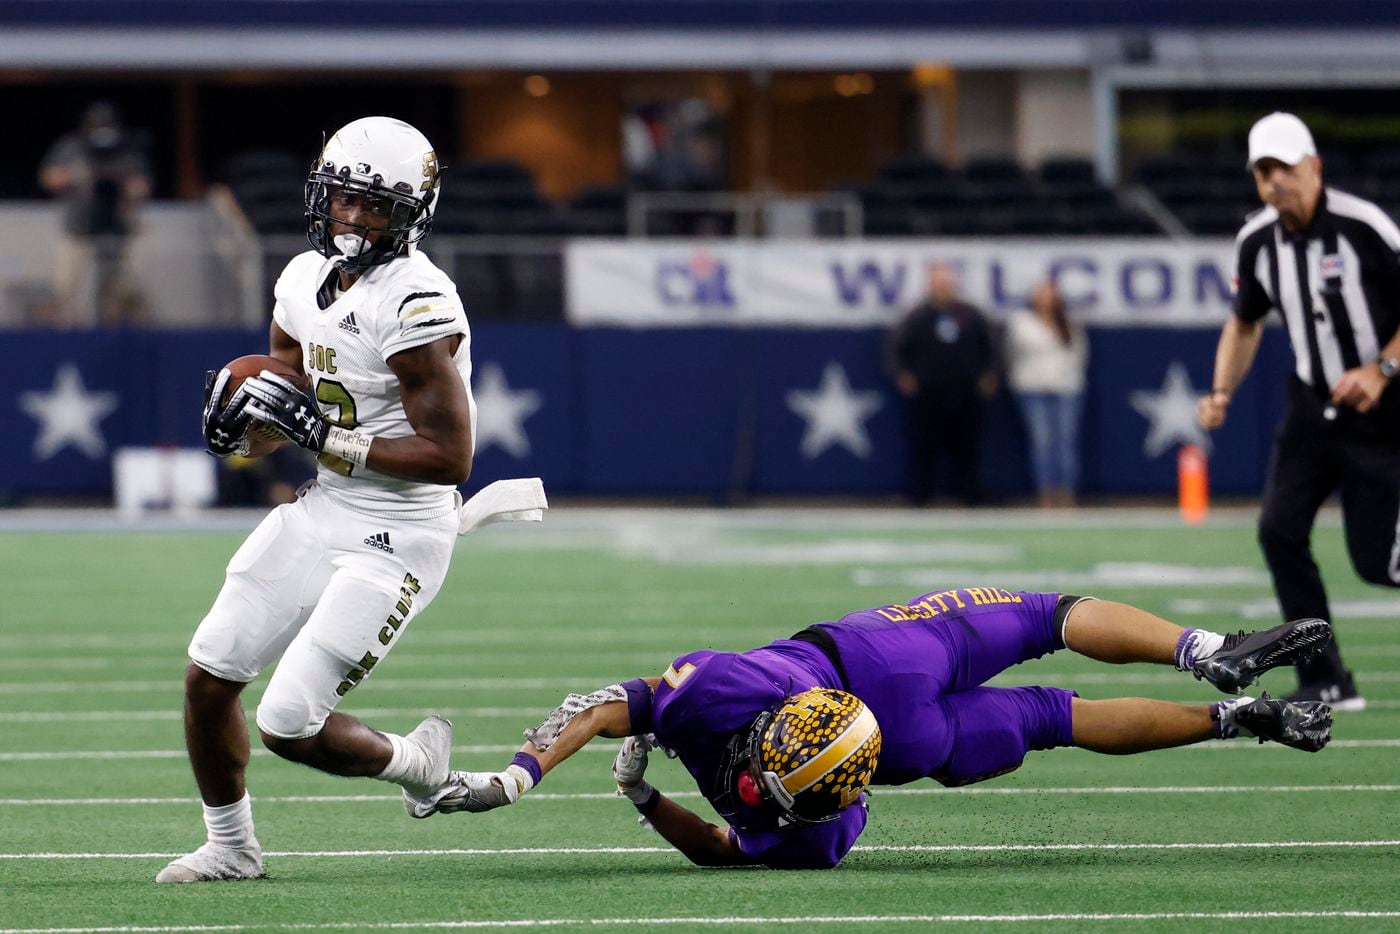 South Oak Cliff running back Ke'Undra Hollywood (12) slips the tackle of Liberty Hill linebacker Devin Riley (7) during the second half of their Class 5A Division II state championship game at AT&T Stadium in Arlington, Saturday, Dec. 18, 2021. South Oak Cliff defeated Liberty Hill 23-14 for Dallas ISD’s first title since 1958. (Elias Valverde II/The Dallas Morning News)